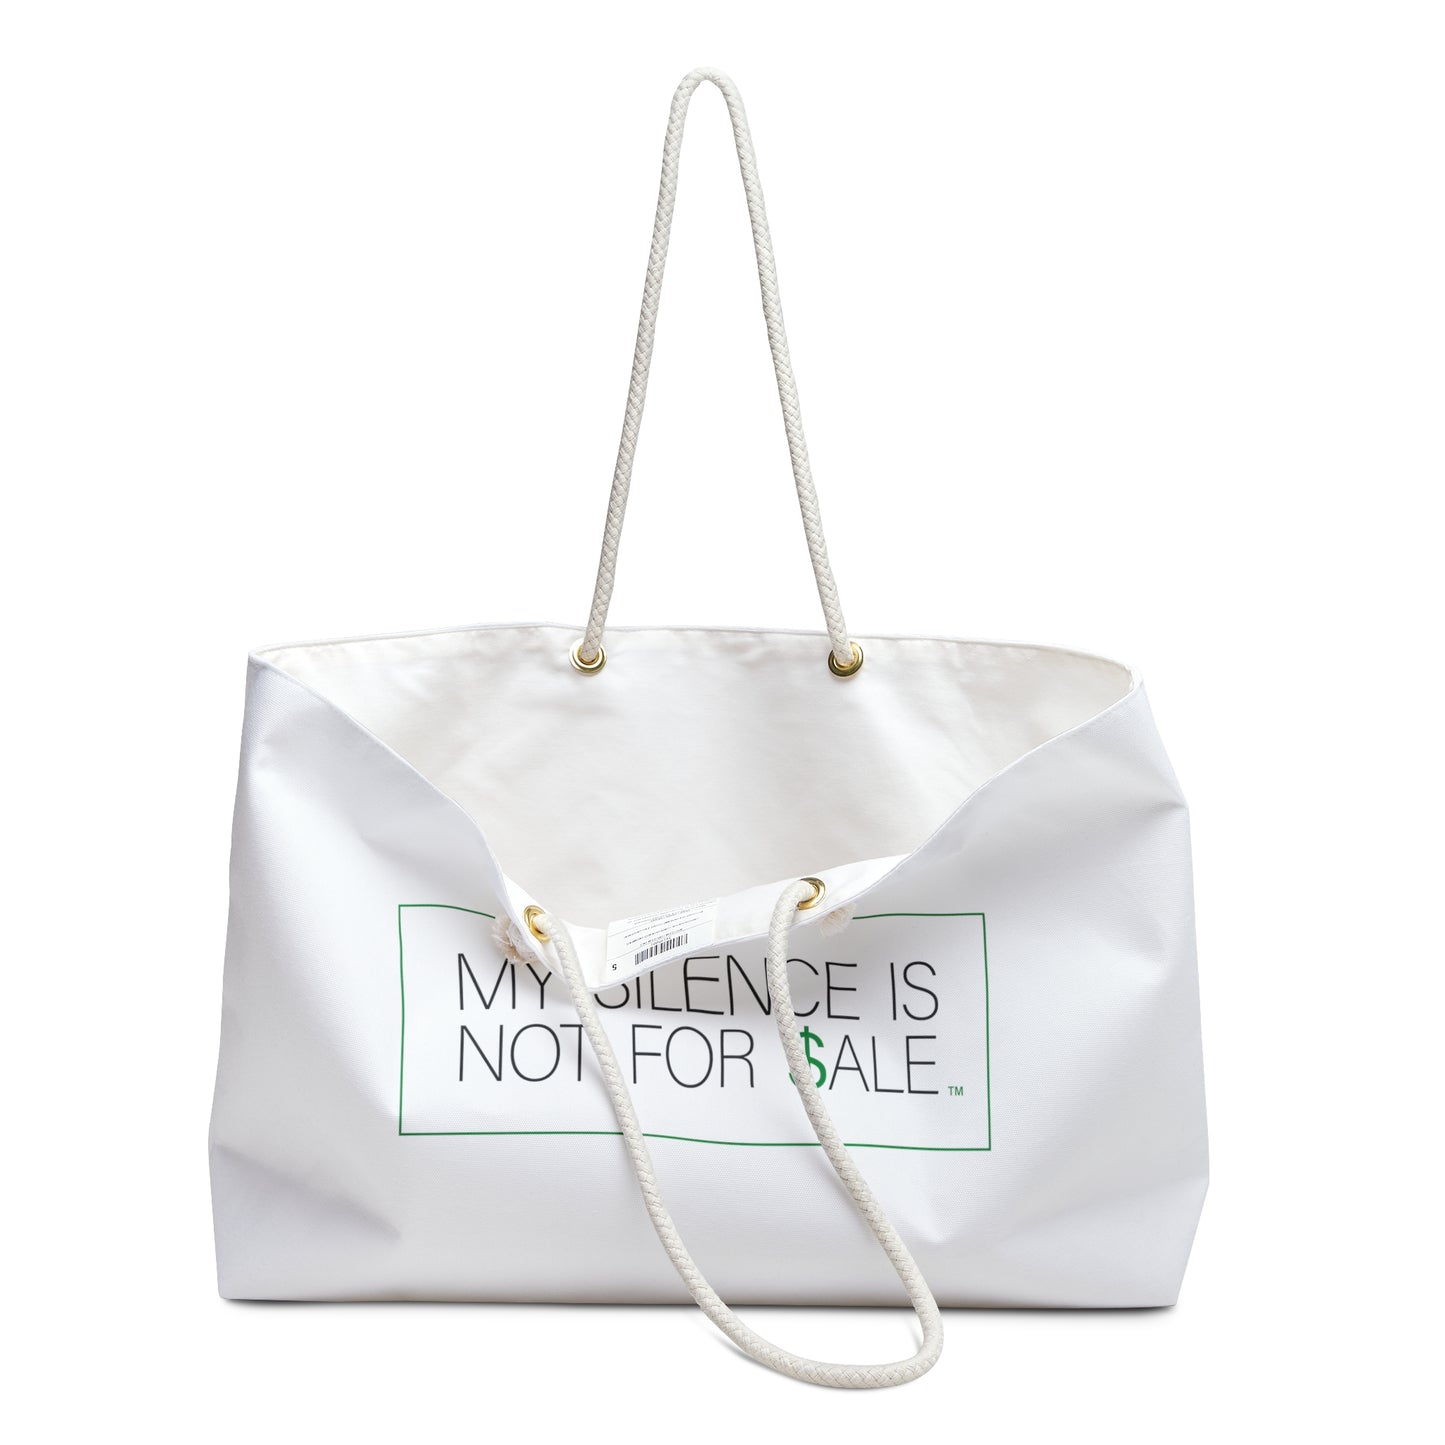 MY SILENCE IS NOT FOR $ALE Weekender Bag